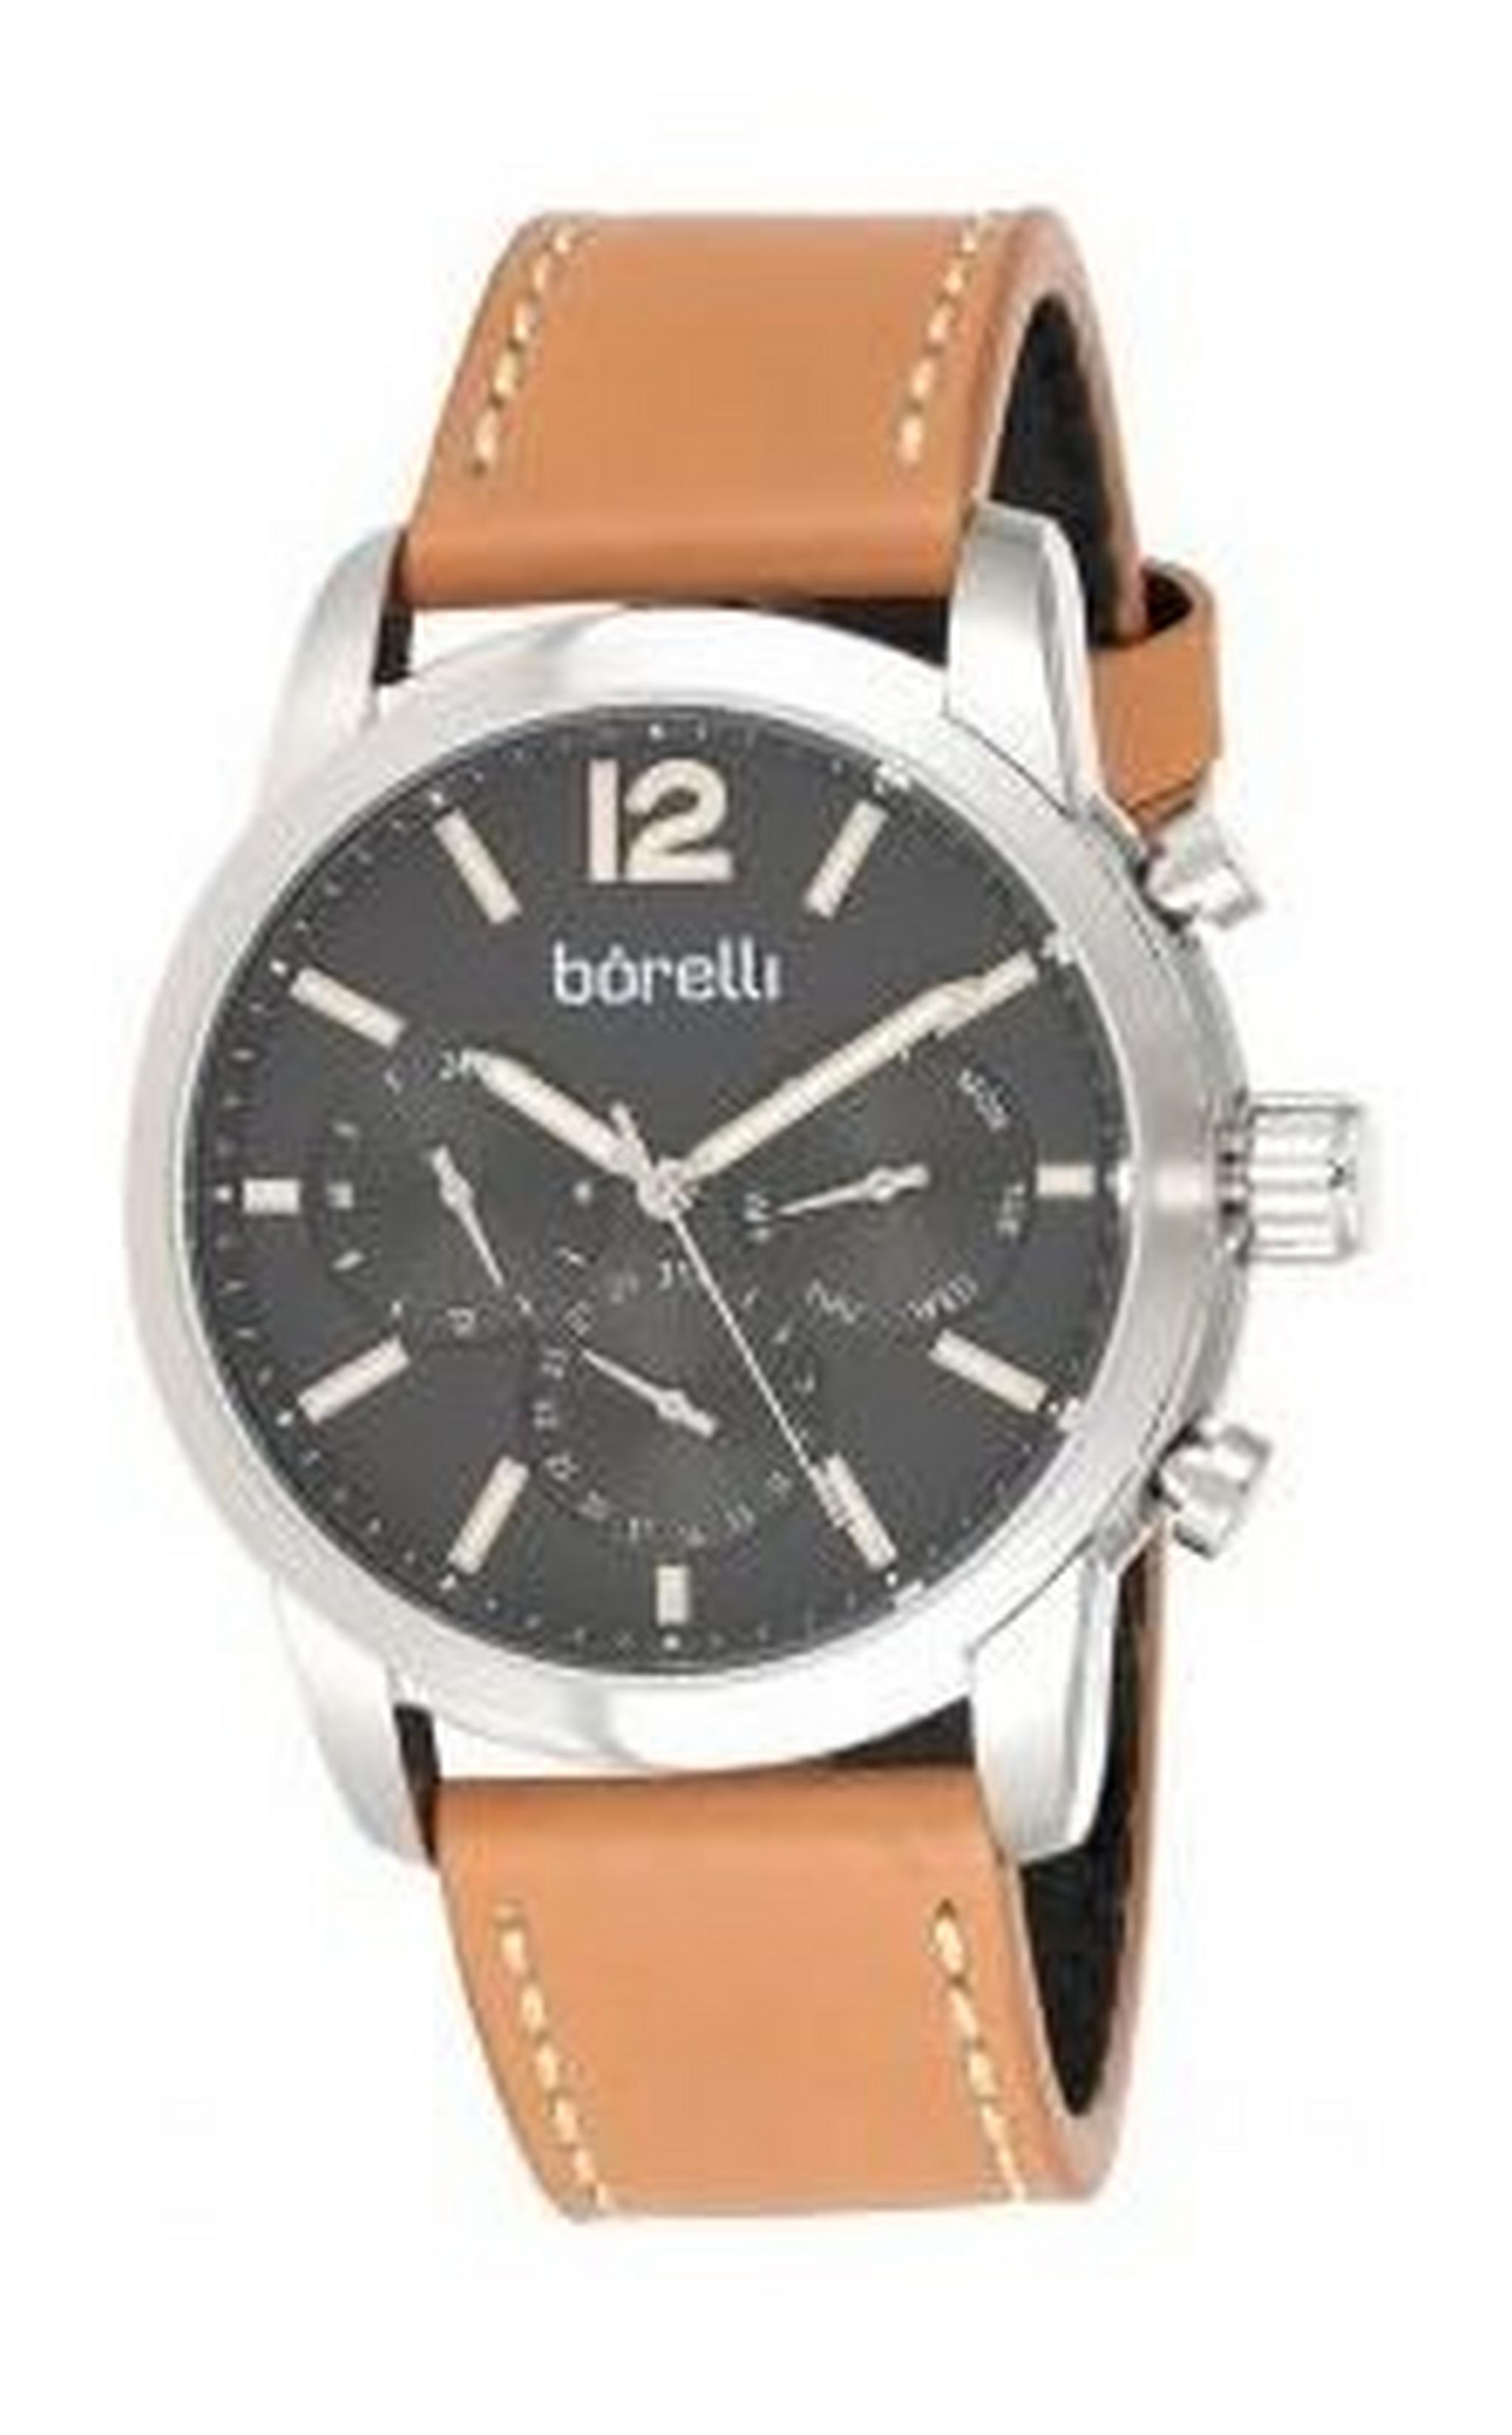 Borelli BMS12500024 Gents Chronograph Watch - Leather Strap – Brown